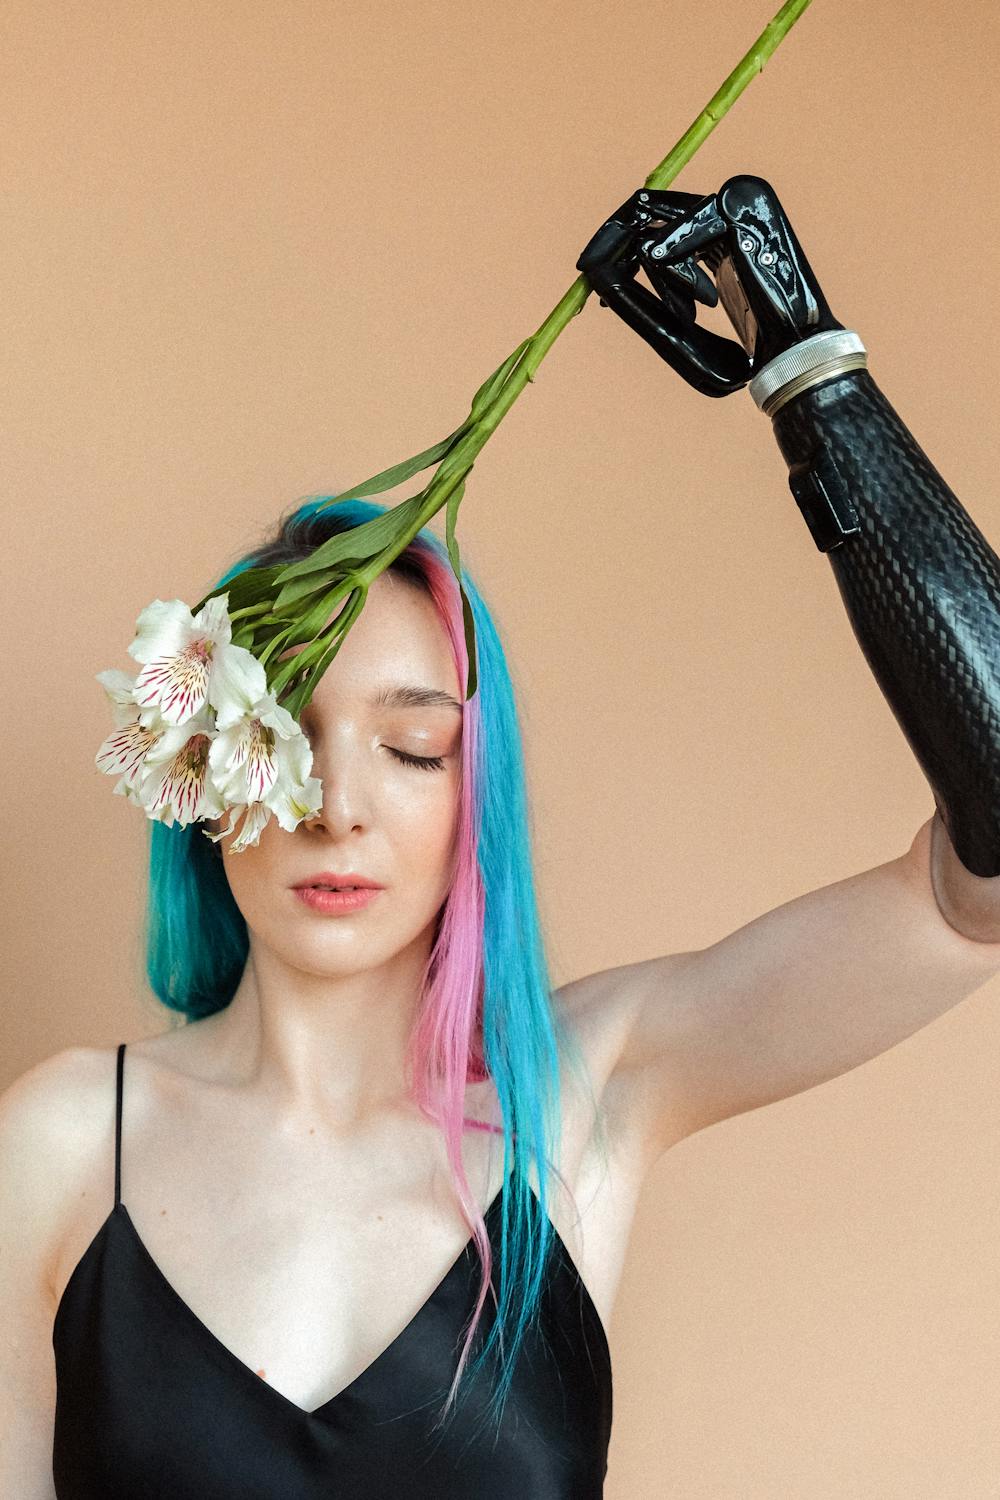 A woman with pink and blue hair holding flowers with a prosthetic arm.